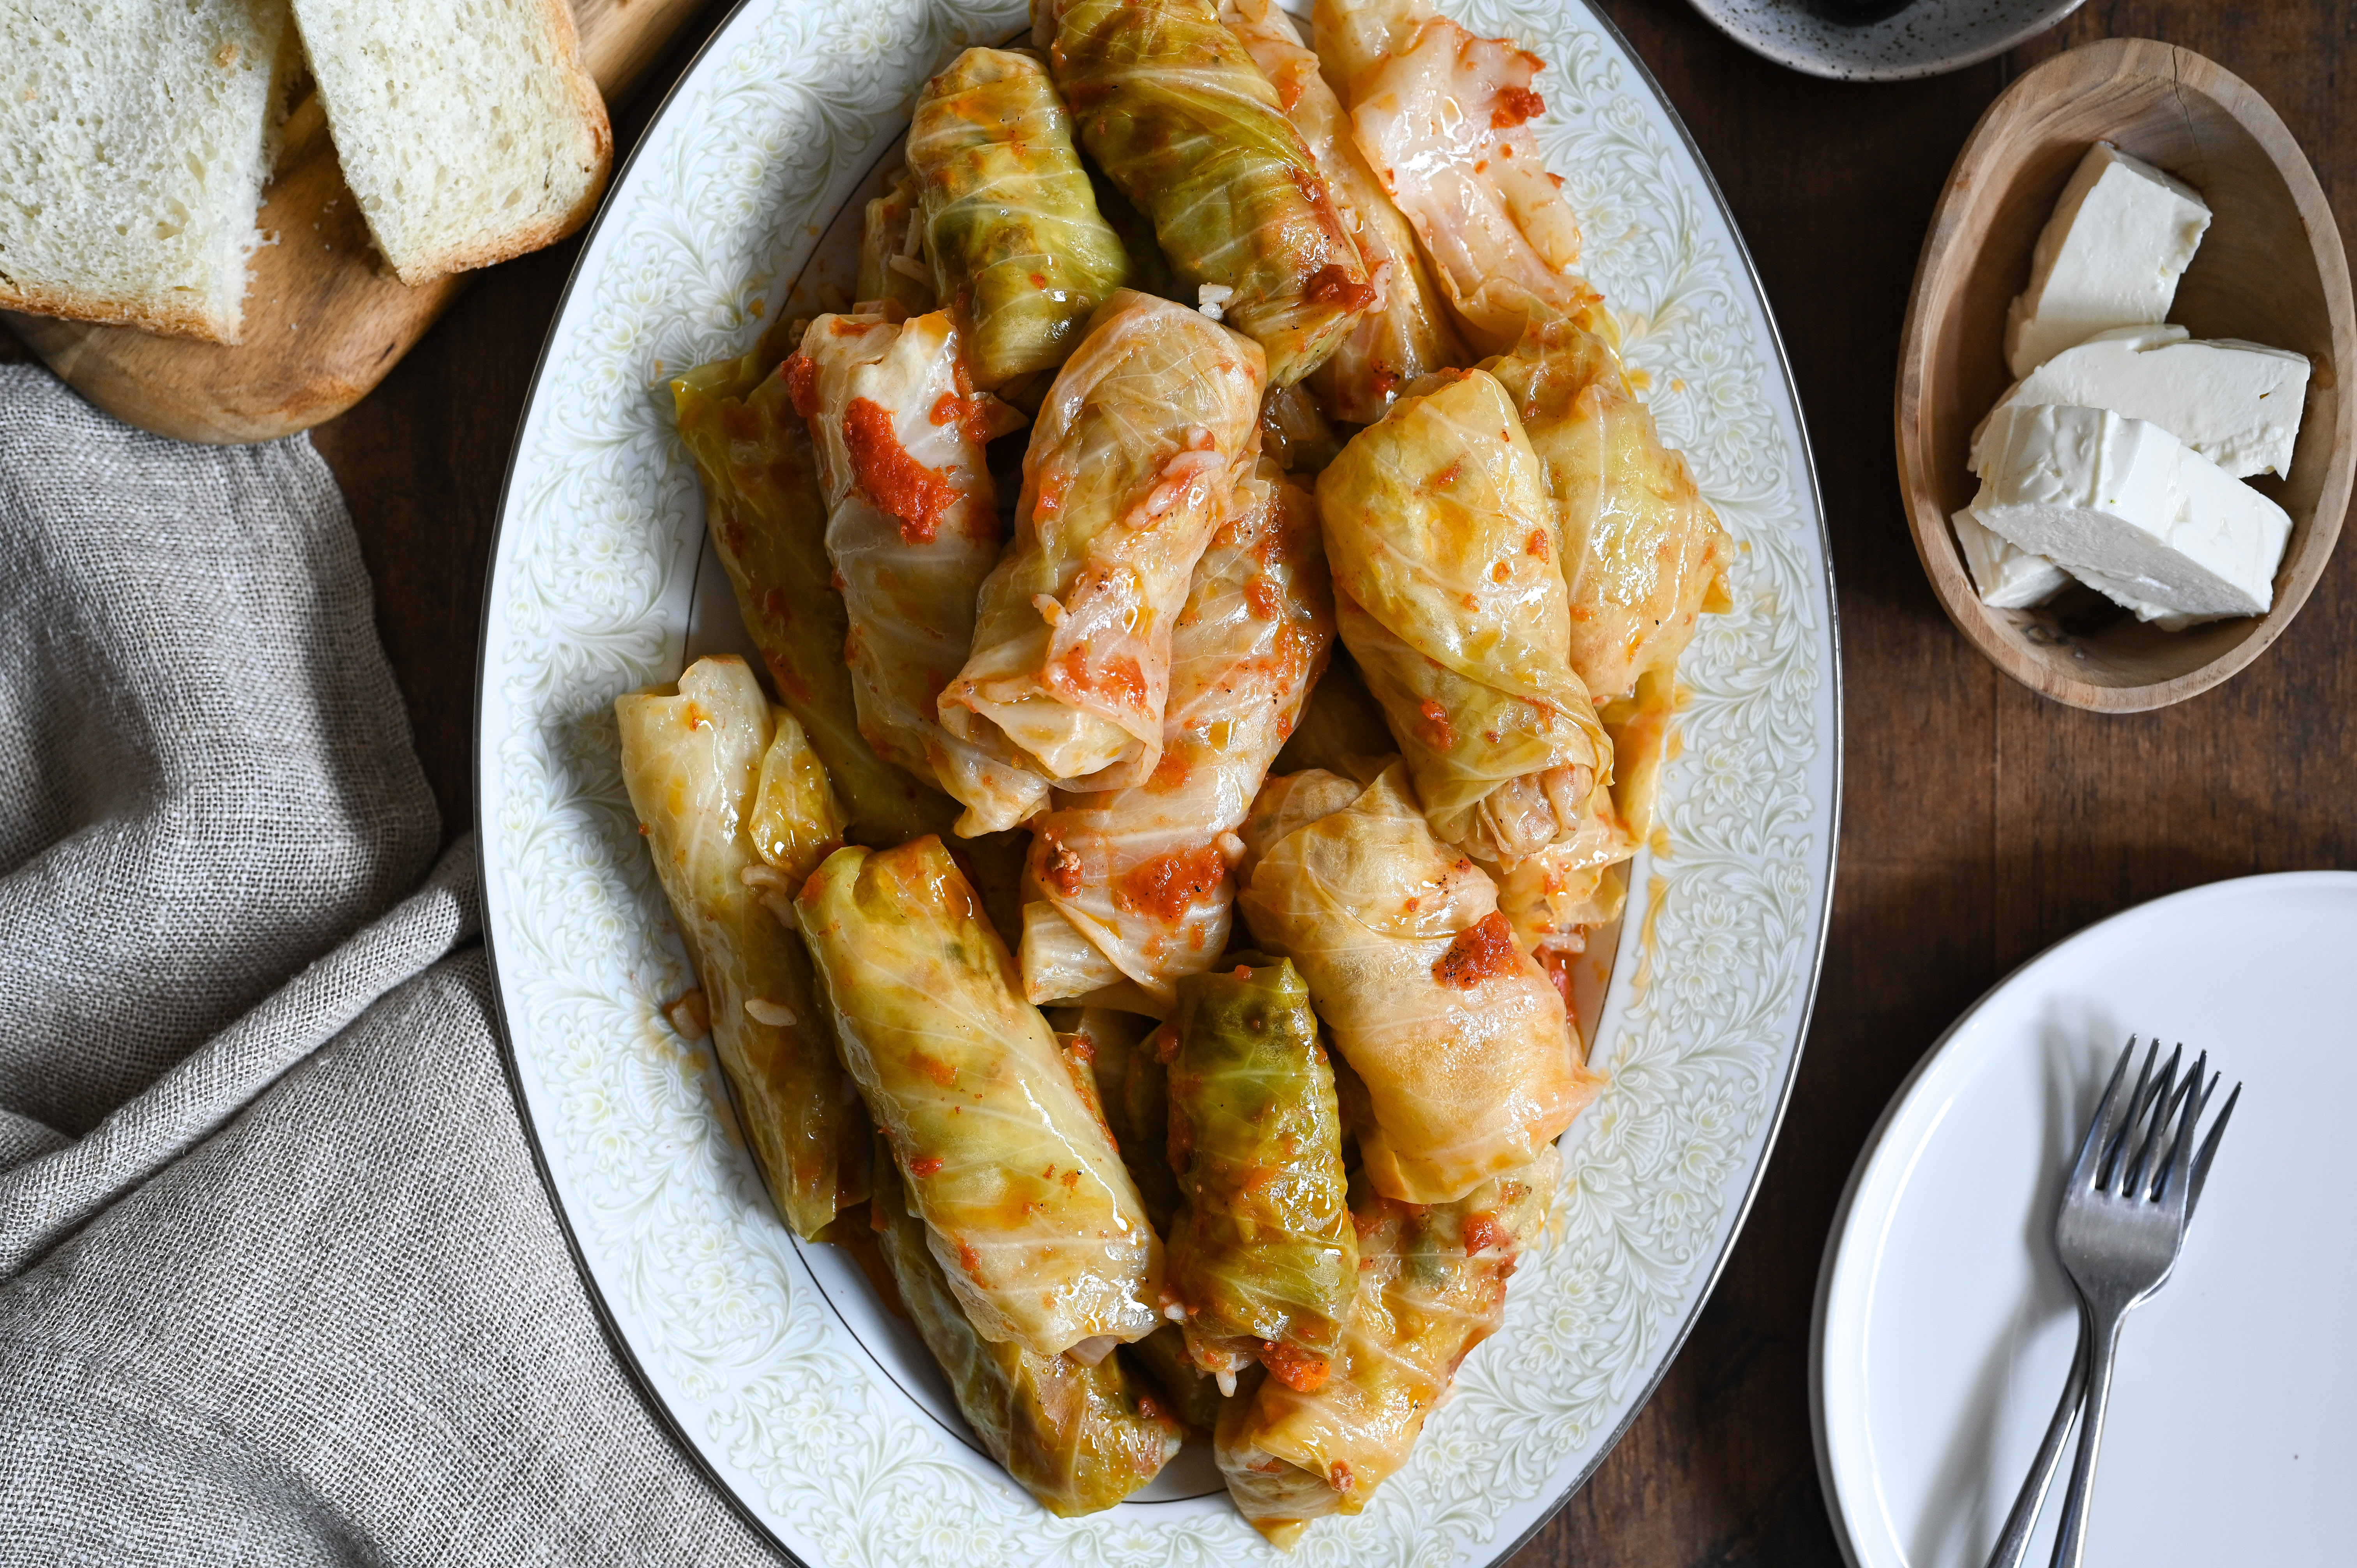 Lahanodolmades or cabbage rolls with tomato